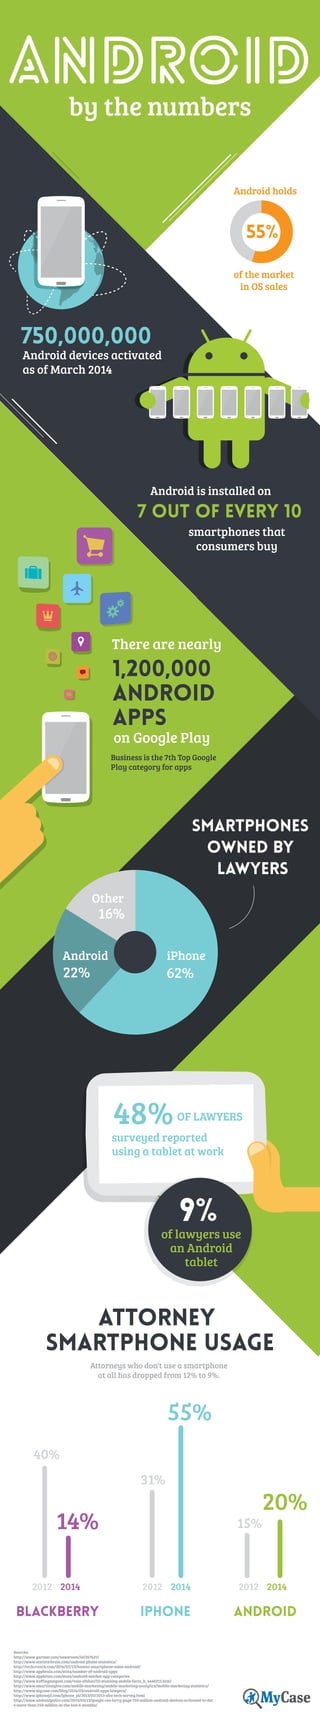 ANDROID
by the numbers
7 out of every 10
Android is installed on
smartphones that
consumers buy
Android holds
of the market
in OS sales
55%
750,000,000
Android devices activated
as of March 2014
1,200,000
ANDROID
APPS
There are nearly
on Google Play
Smartphones
owned by
lawyers
iPhone
62%22%
16%
Android
Other
surveyed reported
using a tablet at work
48%OF LAWYERS
of lawyers use
an Android
tablet
9%
attorney
smartphone usage
Attorneys who don't use a smartphone
at all has dropped from 12% to 9%.
2012 2014
blackberry
40%
14%
2012 2014
iphone
31%
55%
2012 2014
android
15%
20%
Sources:
http://www.gartner.com/newsroom/id/2674215
http://www.statisticbrain.com/android-phone-statistics/
http://techcrunch.com/2014/02/23/kantar-smartphone-sales-android/
http://www.appbrain.com/stats/number-of-android-apps
http://www.appbrain.com/stats/android-market-app-categories
http://www.huffingtonpost.com/vala-afshar/50-stunning-mobile-facts_b_4440213.html
http://www.smartinsights.com/mobile-marketing/mobile-marketing-analytics/mobile-marketing-statistics/
http://www.mycase.com/blog/2014/03/android-apps-lawyers/
http://www.iphonejd.com/iphone_jd/2013/07/2013-aba-tech-survey.html
http://www.androidpolice.com/2013/03/13/google-ceo-larry-page-750-million-android-devices-activated-to-dat
e-more-than-250-million-in-the-last-6-months/
Business is the 7th Top Google
Play category for apps
 